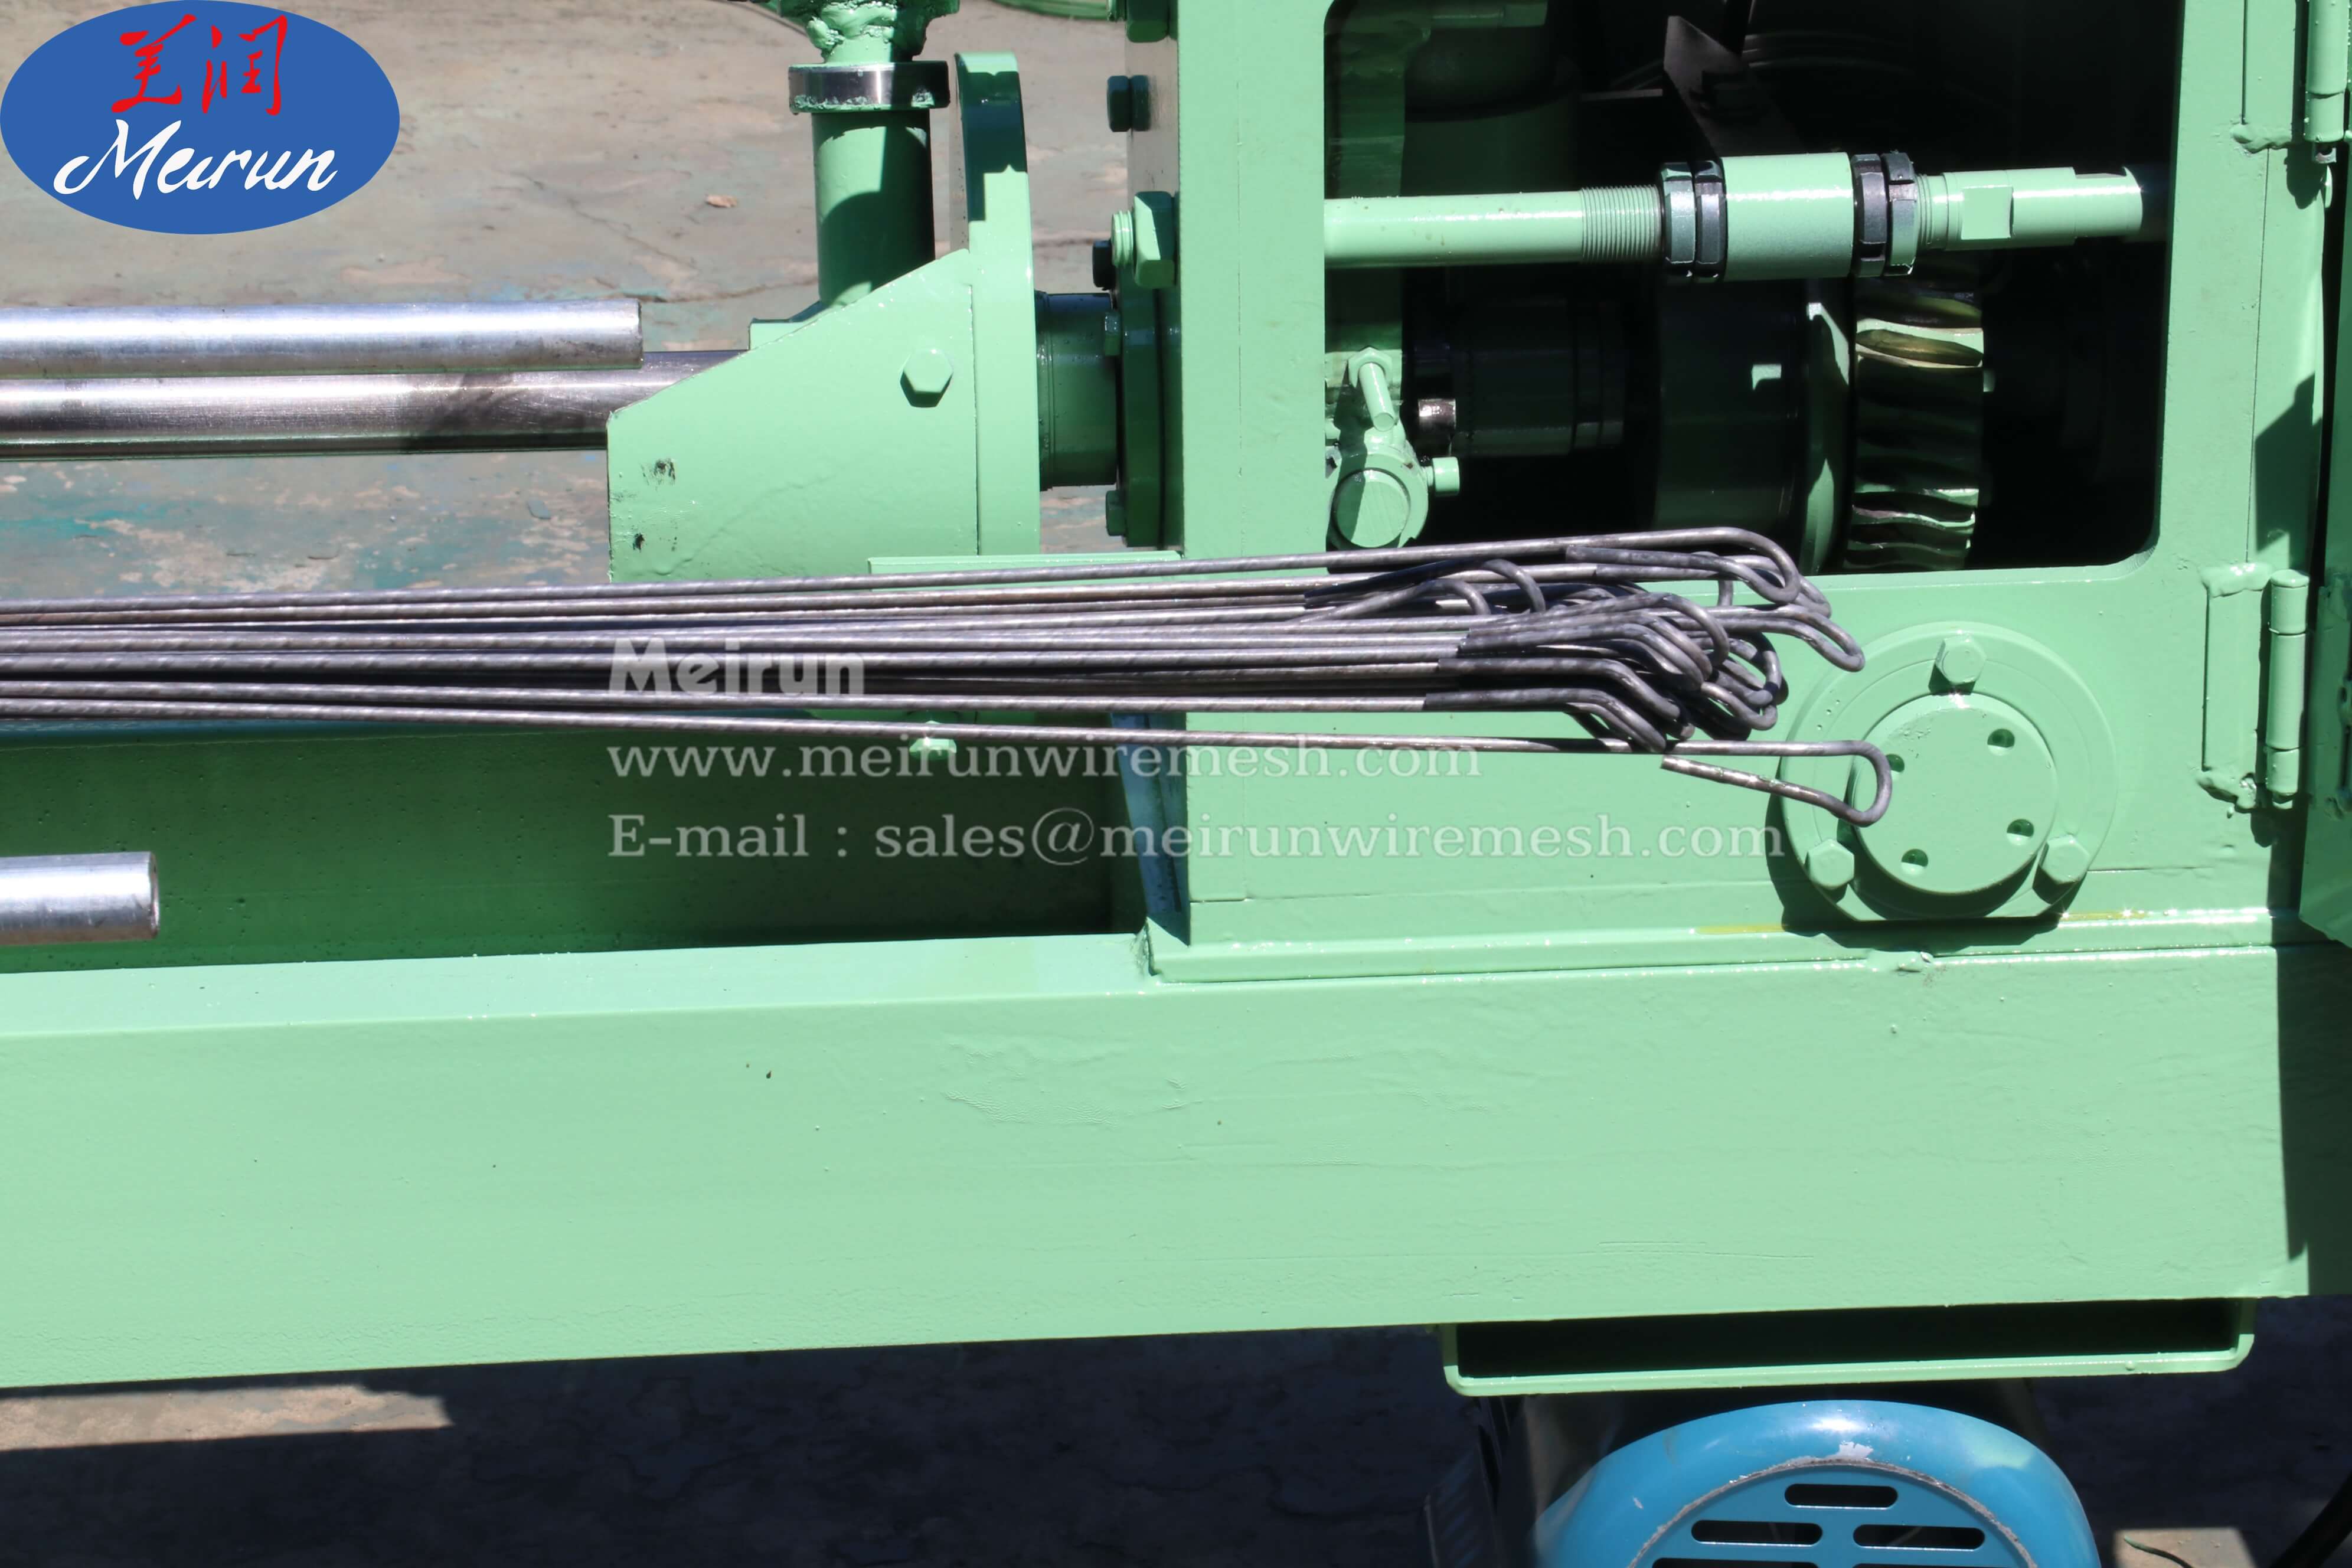 Cotton Bale Wire Bending Machine To Make Quick Link Bale Ties